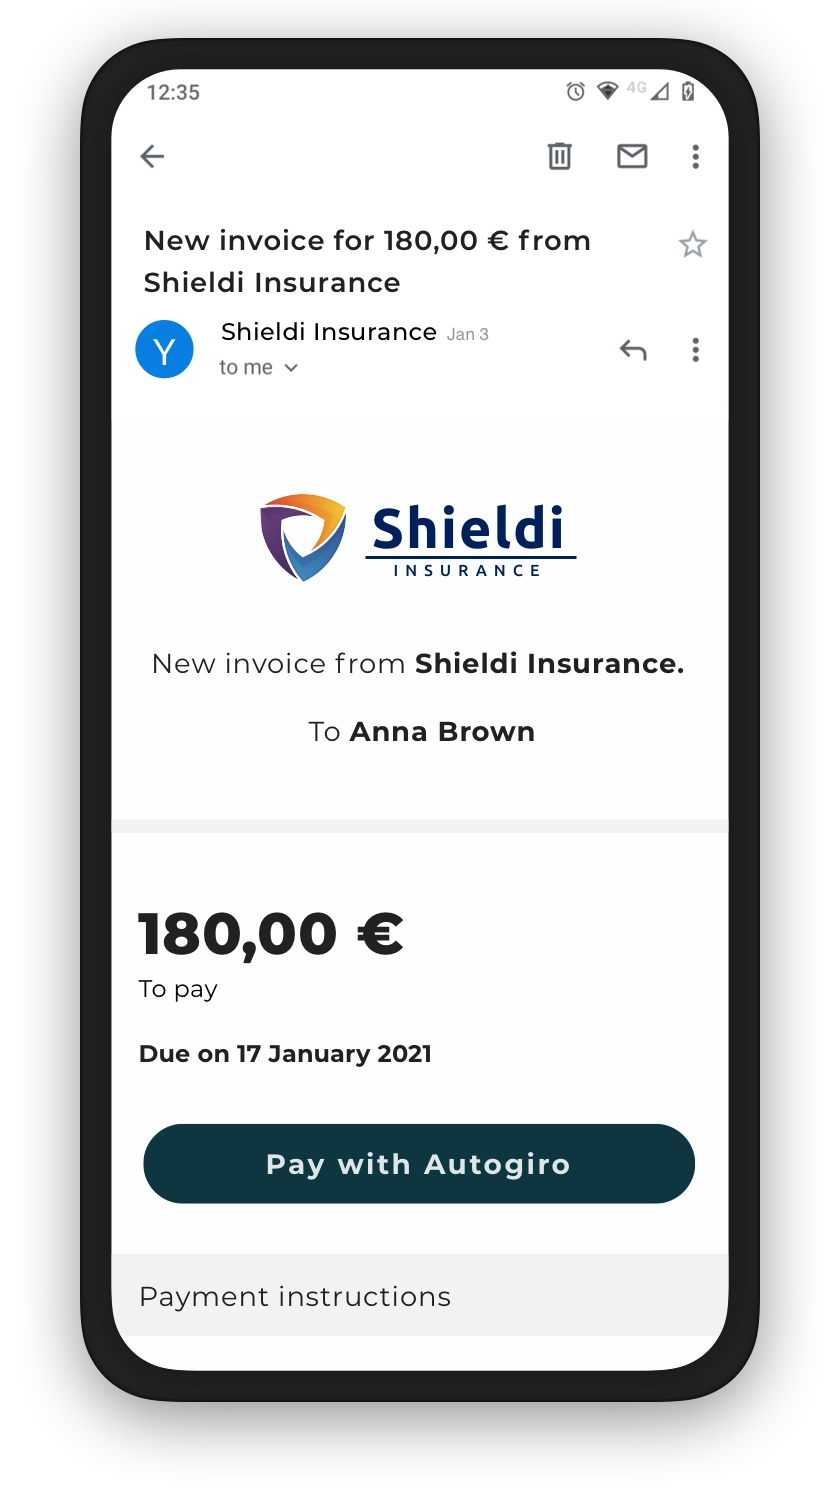 Insurance visuals - Invoice email with pay with autogiro button 2@2x-1